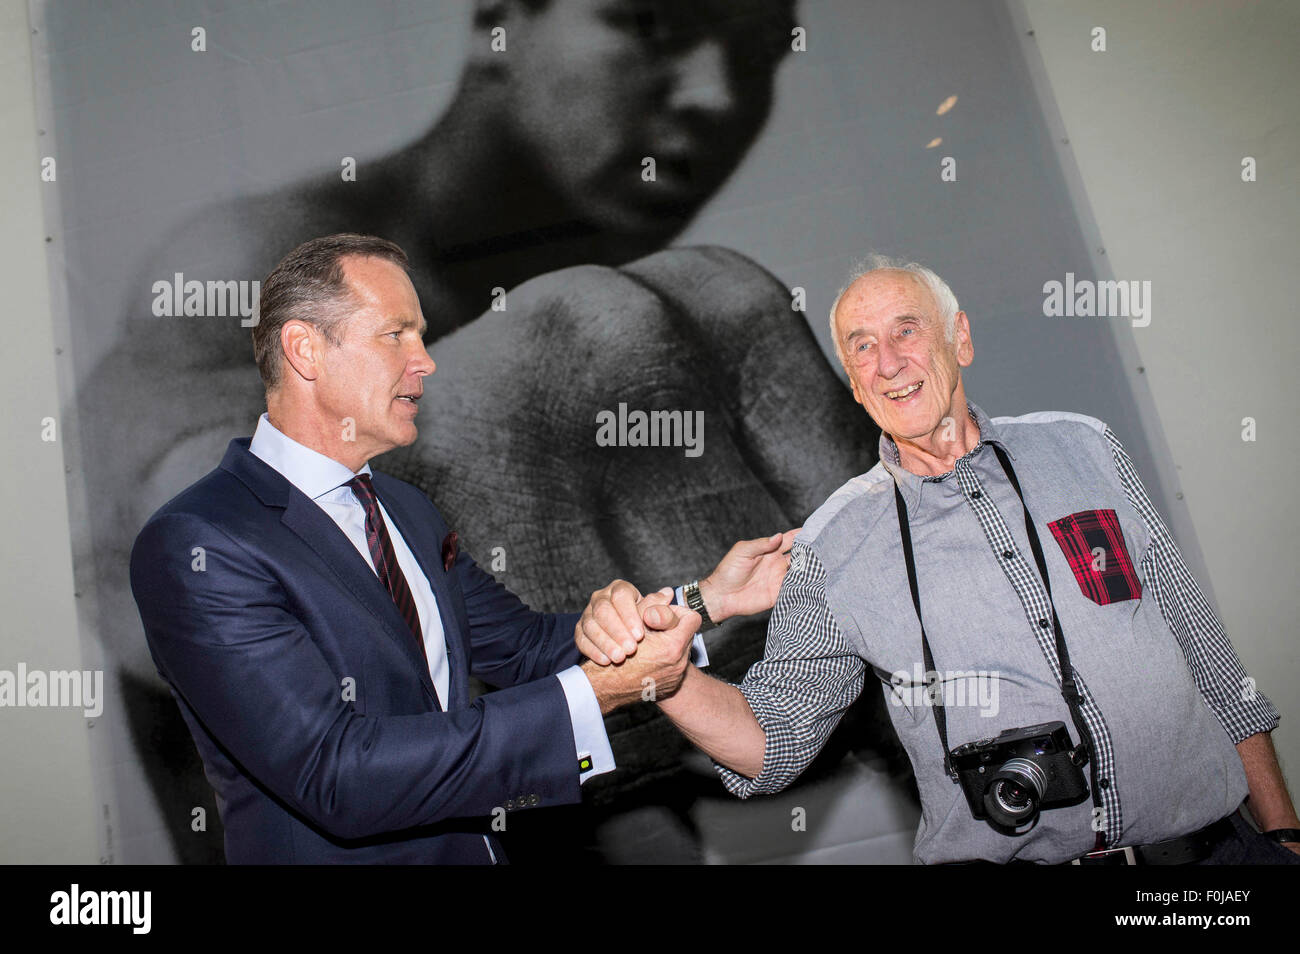 Berlin, Germany. 14th Aug, 2015. Henry Maske and Thomas Höpker attend the 'Muhammad Ali' Exhibition Opening at Galerie Camera Work on August 14, 2015 in Berlin, Germany./picture alliance © dpa/Alamy Live News Stock Photo